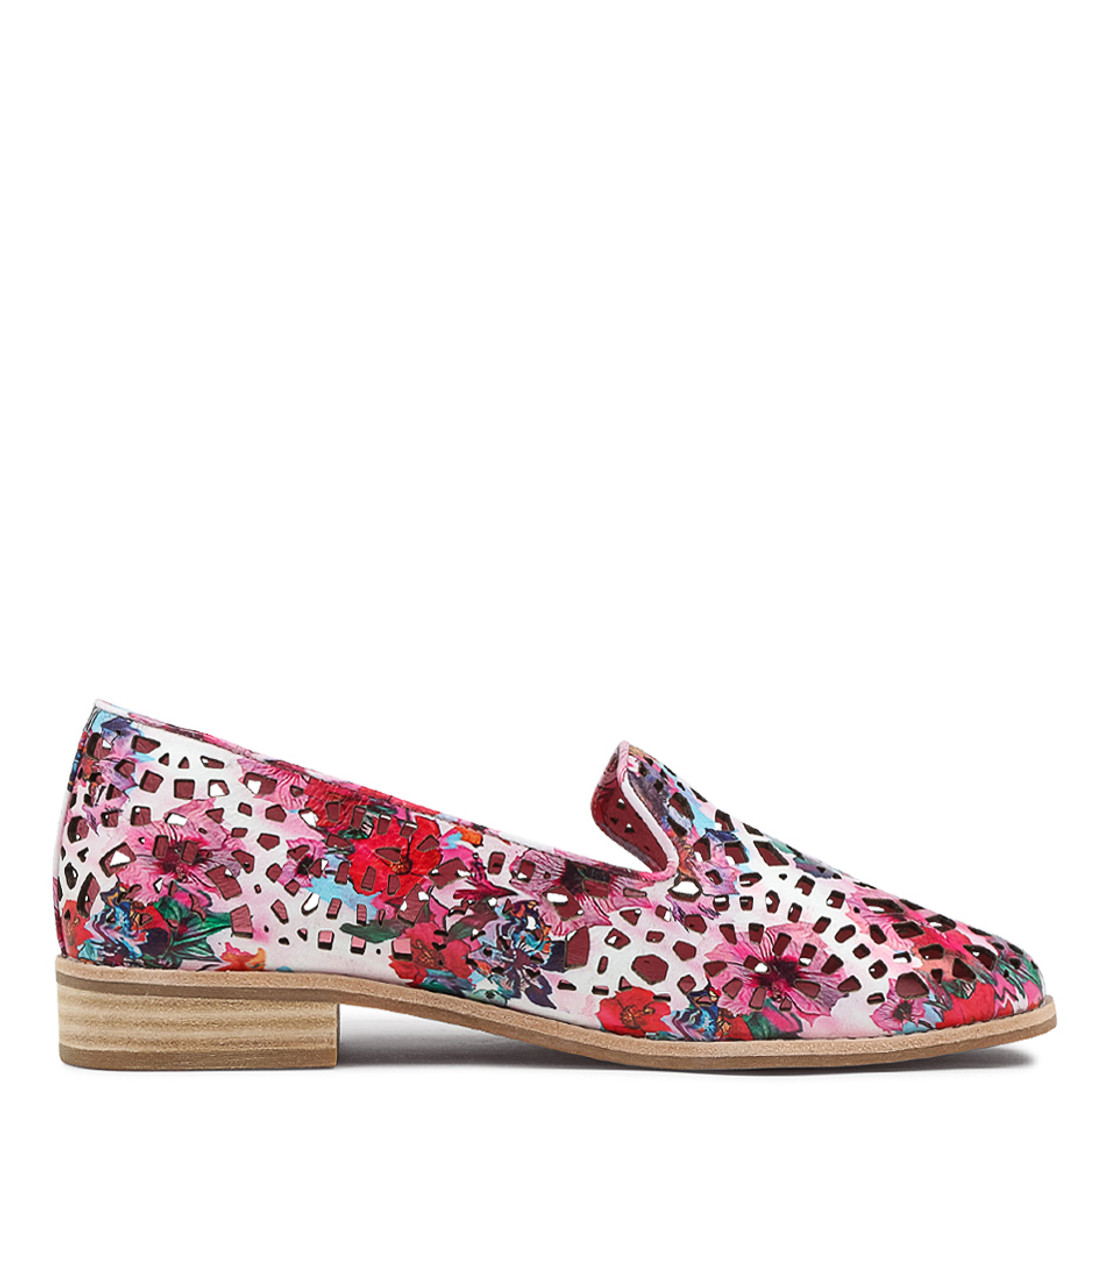 Adaring Poppy Print Leather Loafers - Django and Juliette